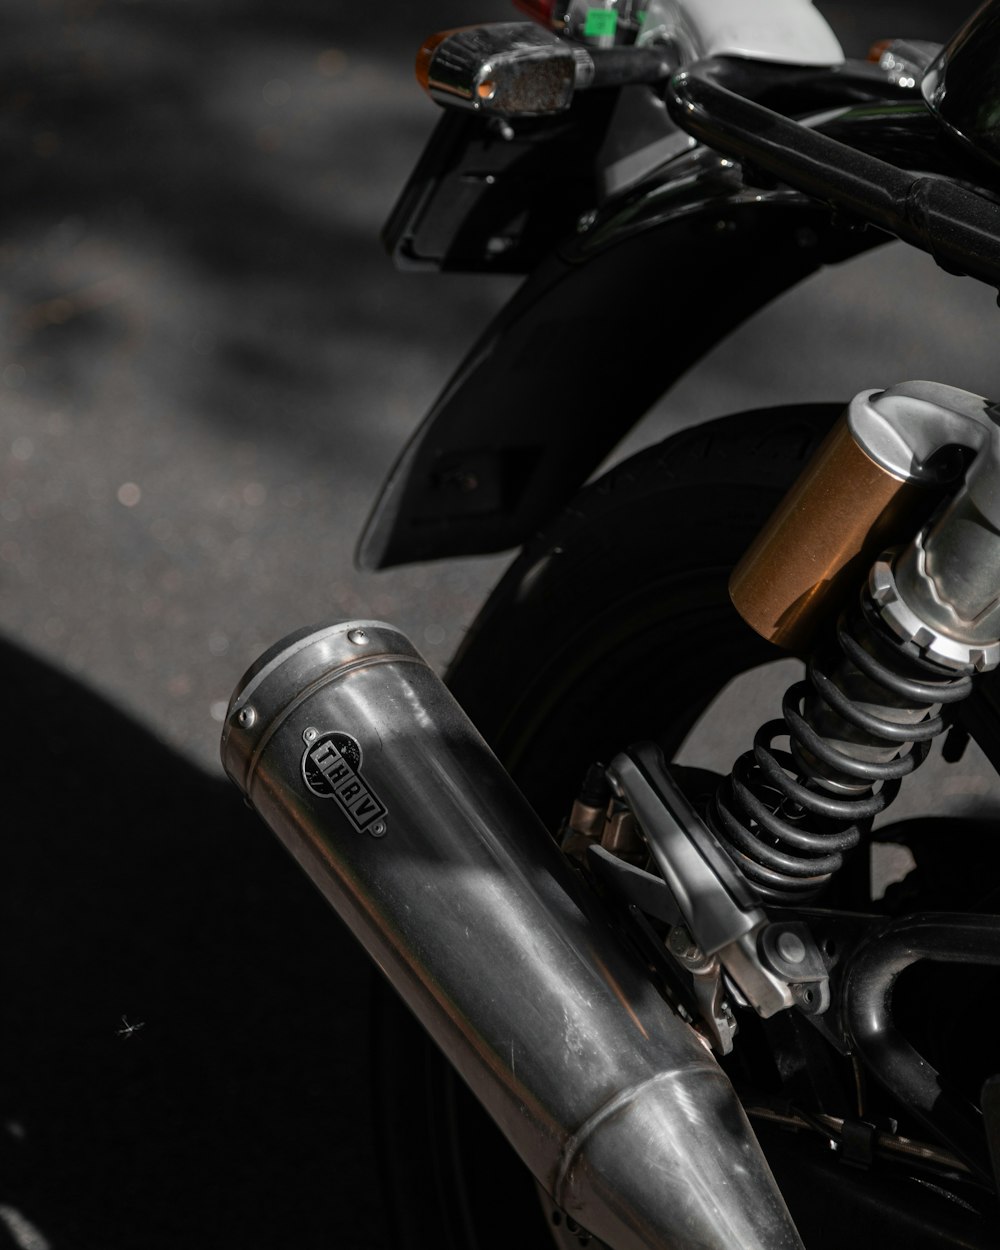 a close up of a motorcycle with a metal handlebar